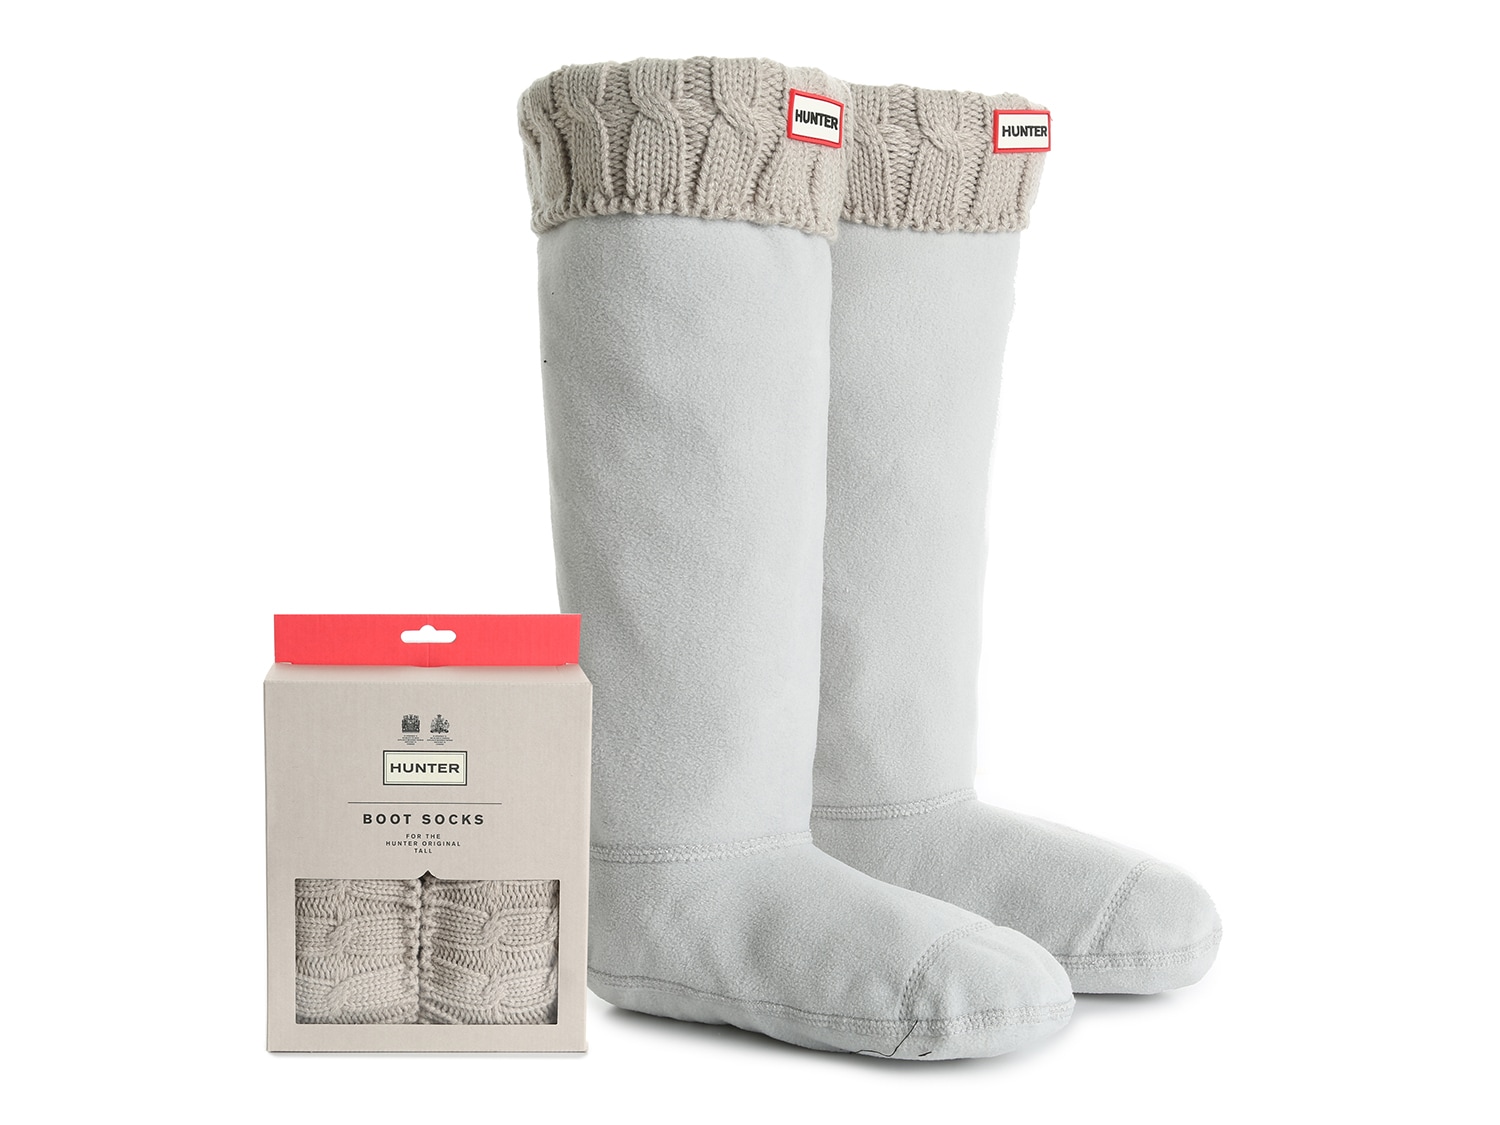 7 & 8 Hunter Original Adult Unisex Tall Boot Socks in White-Large-Fits sizes 6 